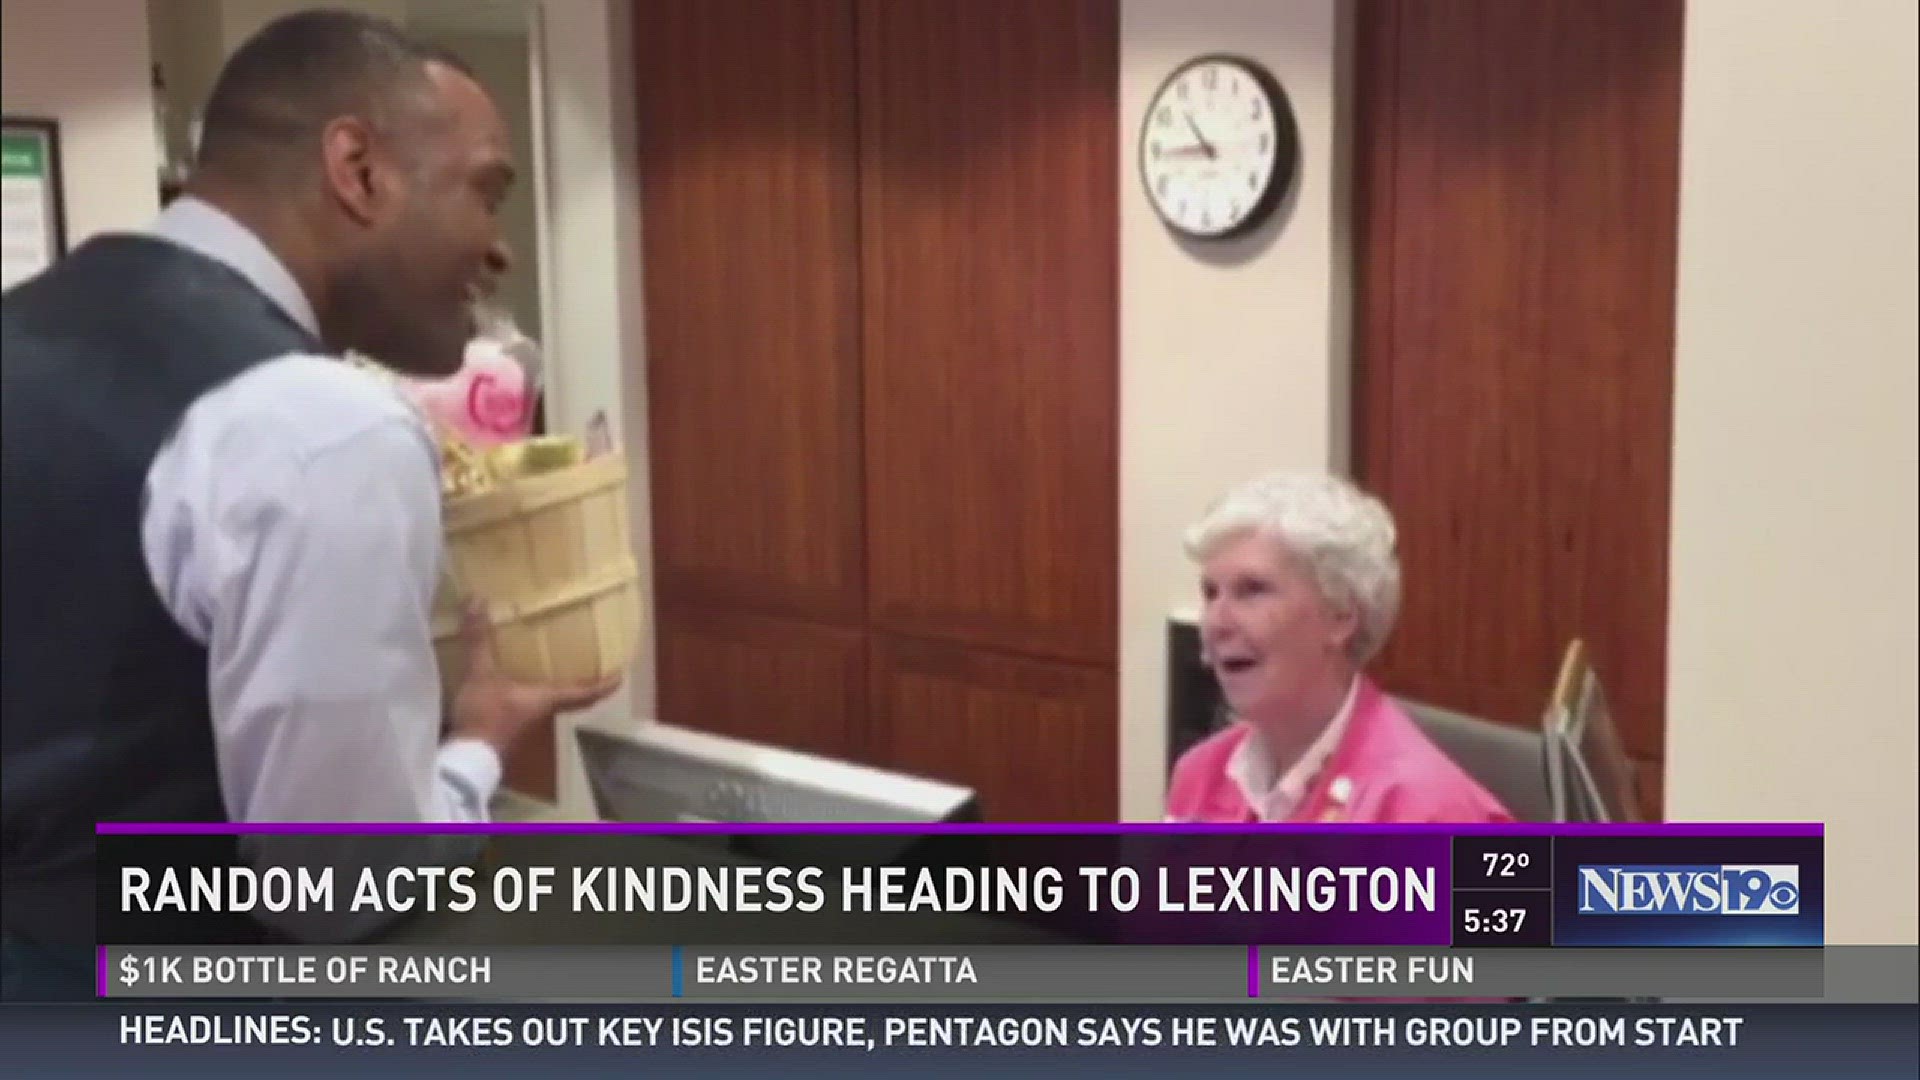 Deon Guillory was over in Lexington to spread some goodwill Friday.